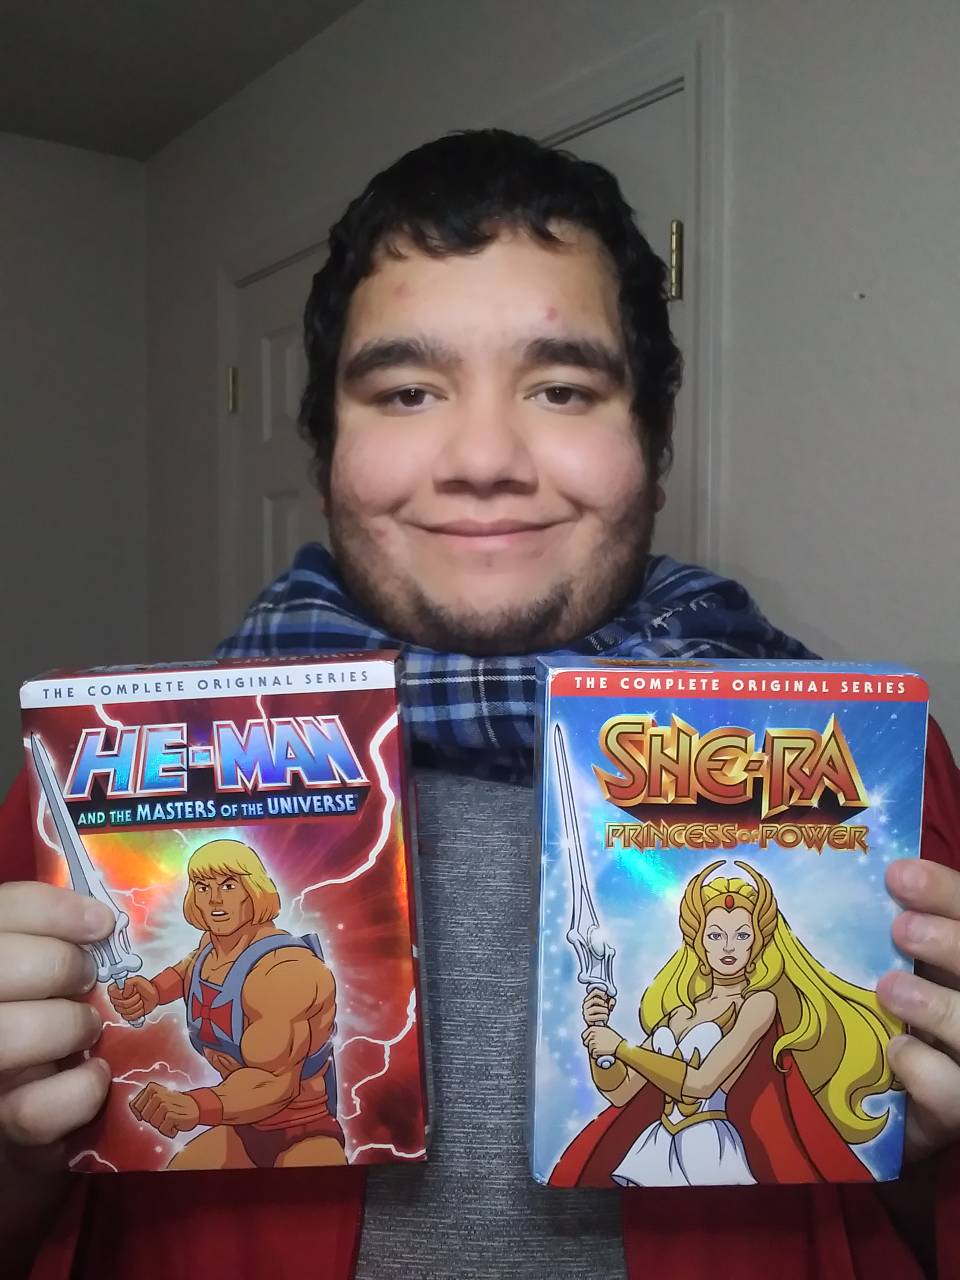 My He-Man and She-Ra DVD Collection by Batboy101 on DeviantArt